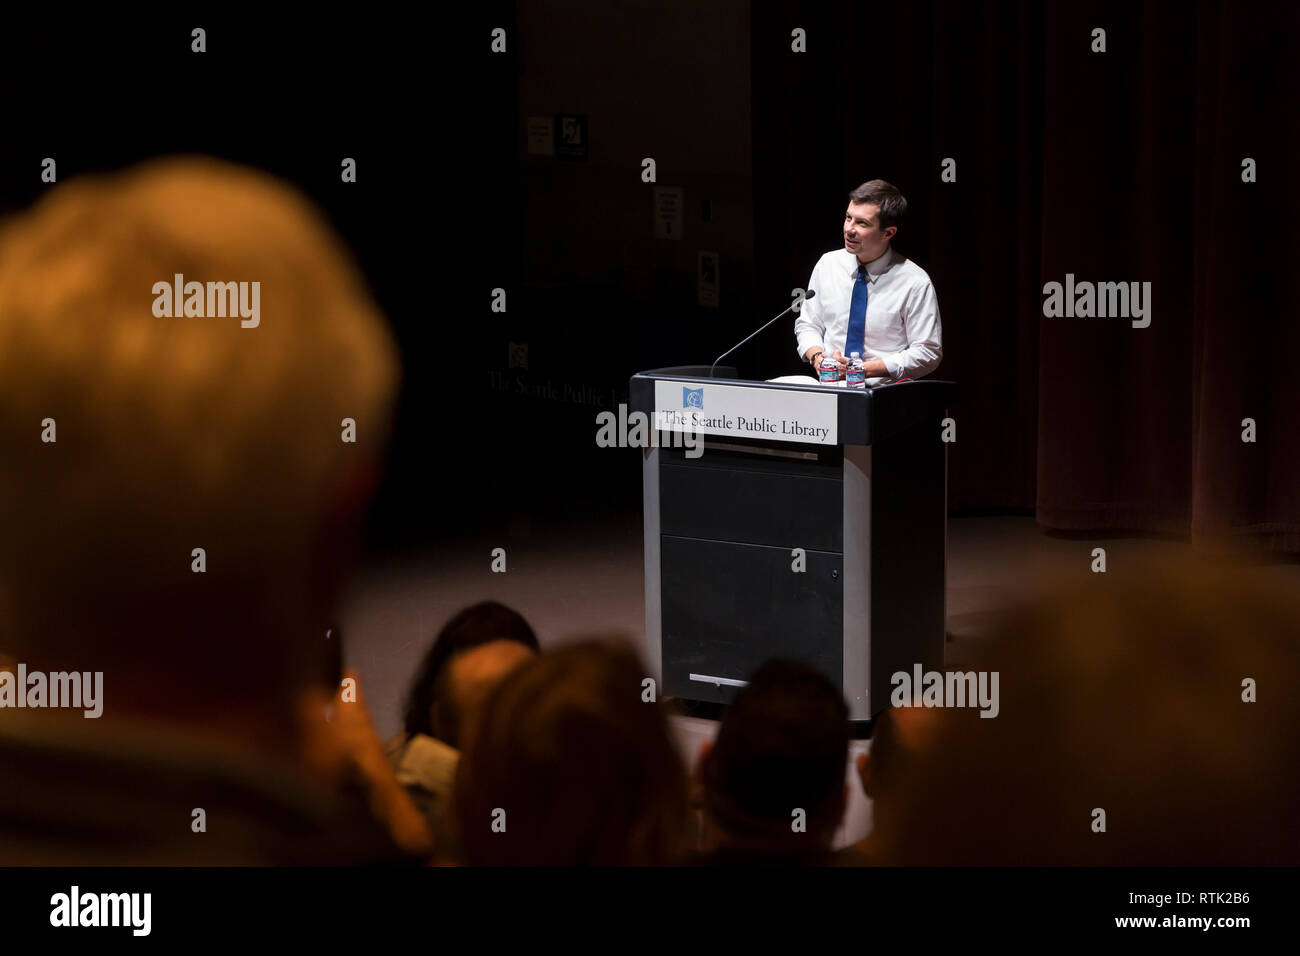 Seattle, Washington DC, USA. 28th Feb 2019. South Bend Indiana Mayor and 2020 presidential candidate Pete Buttigieg discusses his biography 'Shortest Way Home' at the Seattle Central Library. Credit: Paul Christian Gordon/Alamy Live News Stock Photo